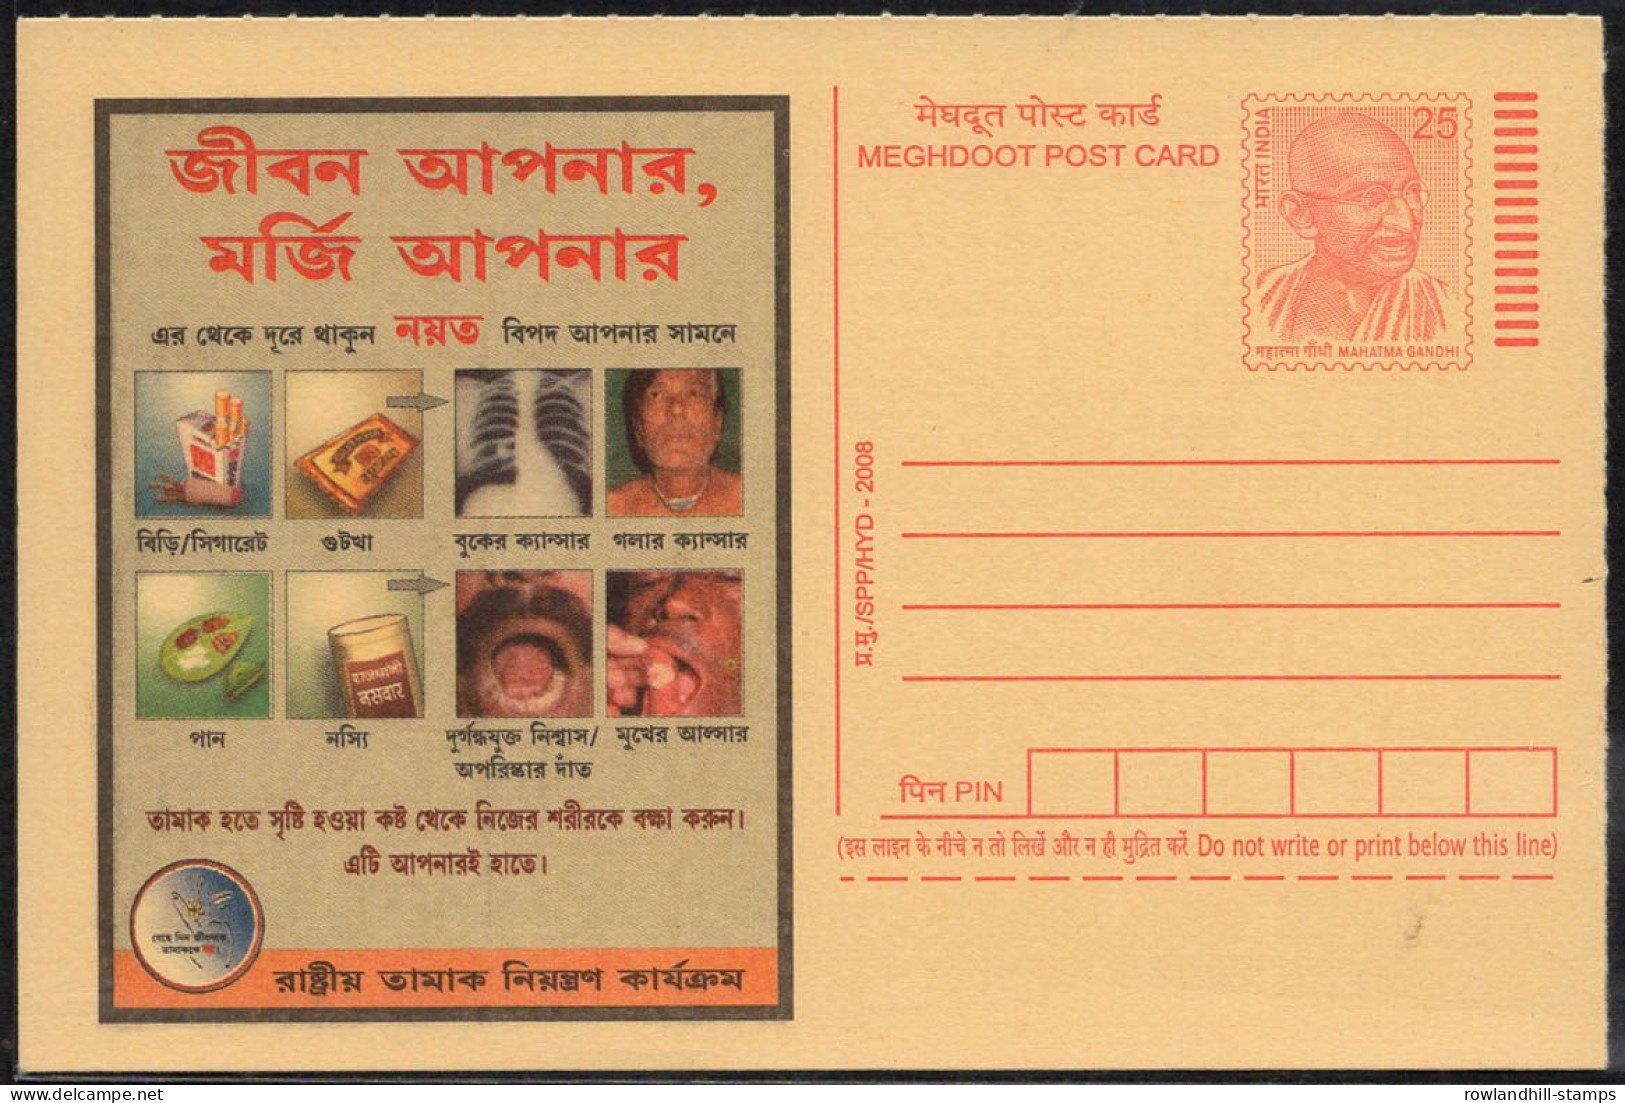 INDIA, 2008, Stop SMOKING, Tobacco, Meghdoot POST CARD, Unused, Stationery, Cigarette, Cancer, Disease Drugs, X-ray, A23 - Drogen